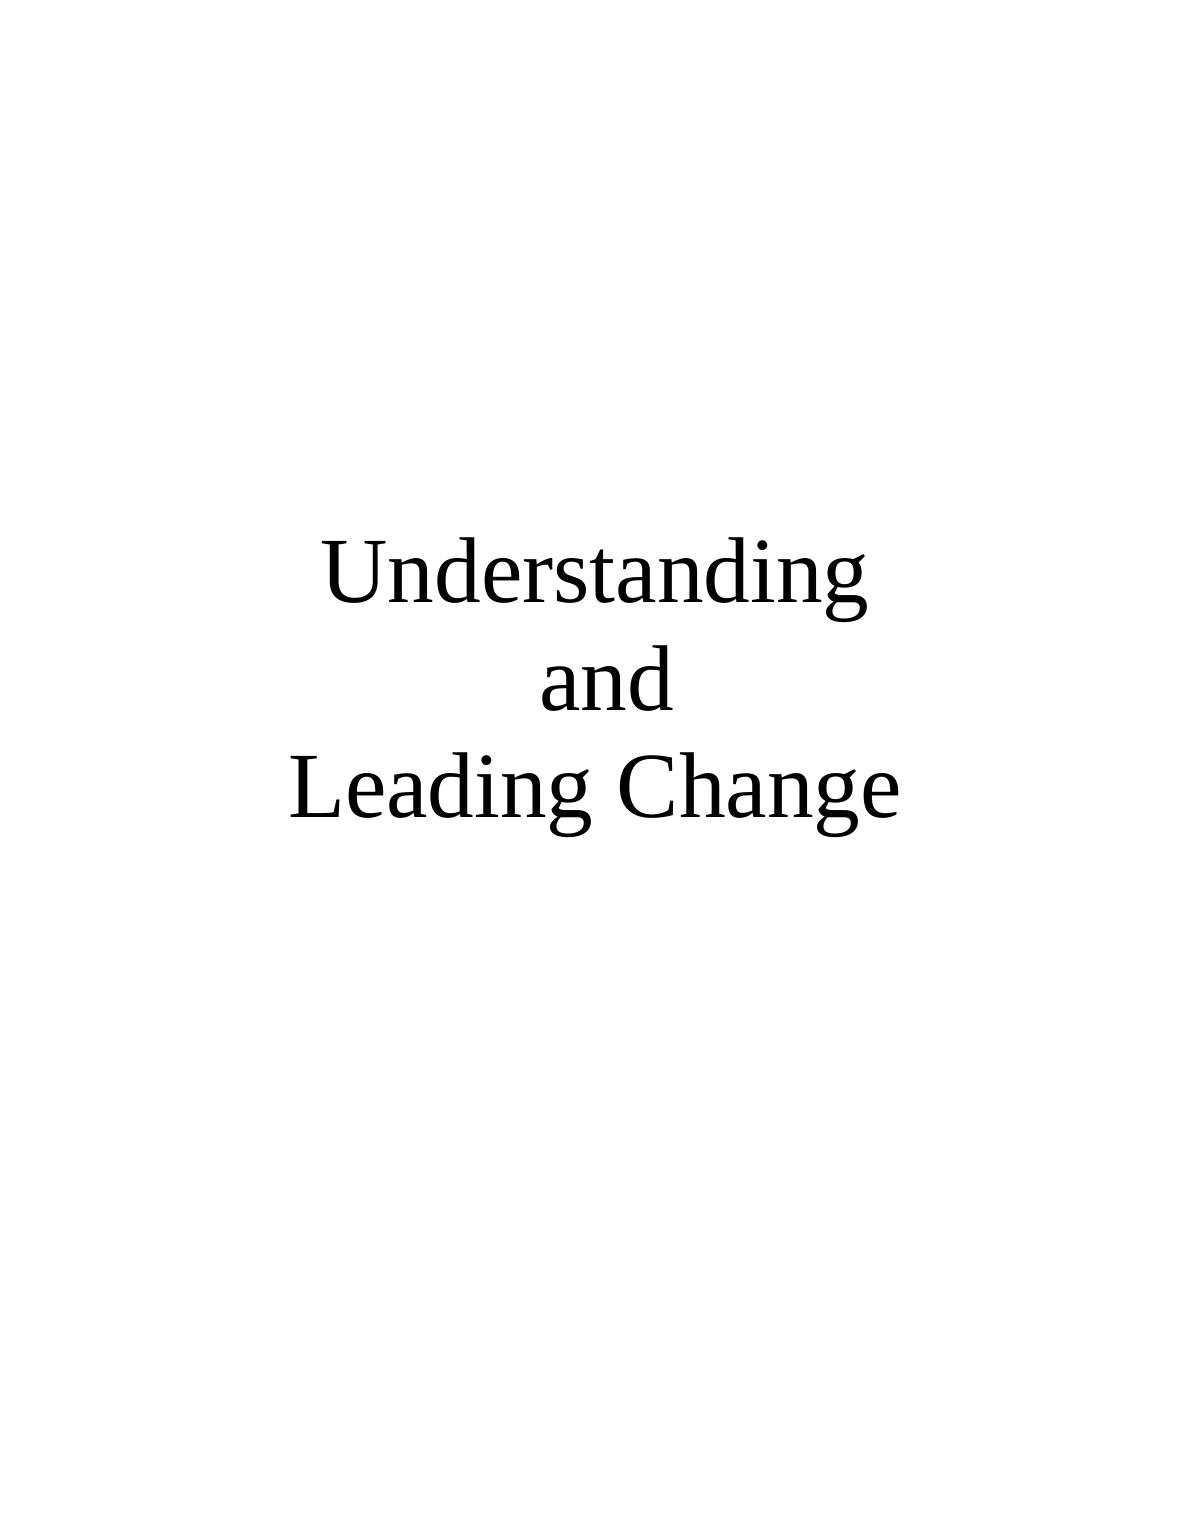 Understanding and Leading Change: Assignment_1